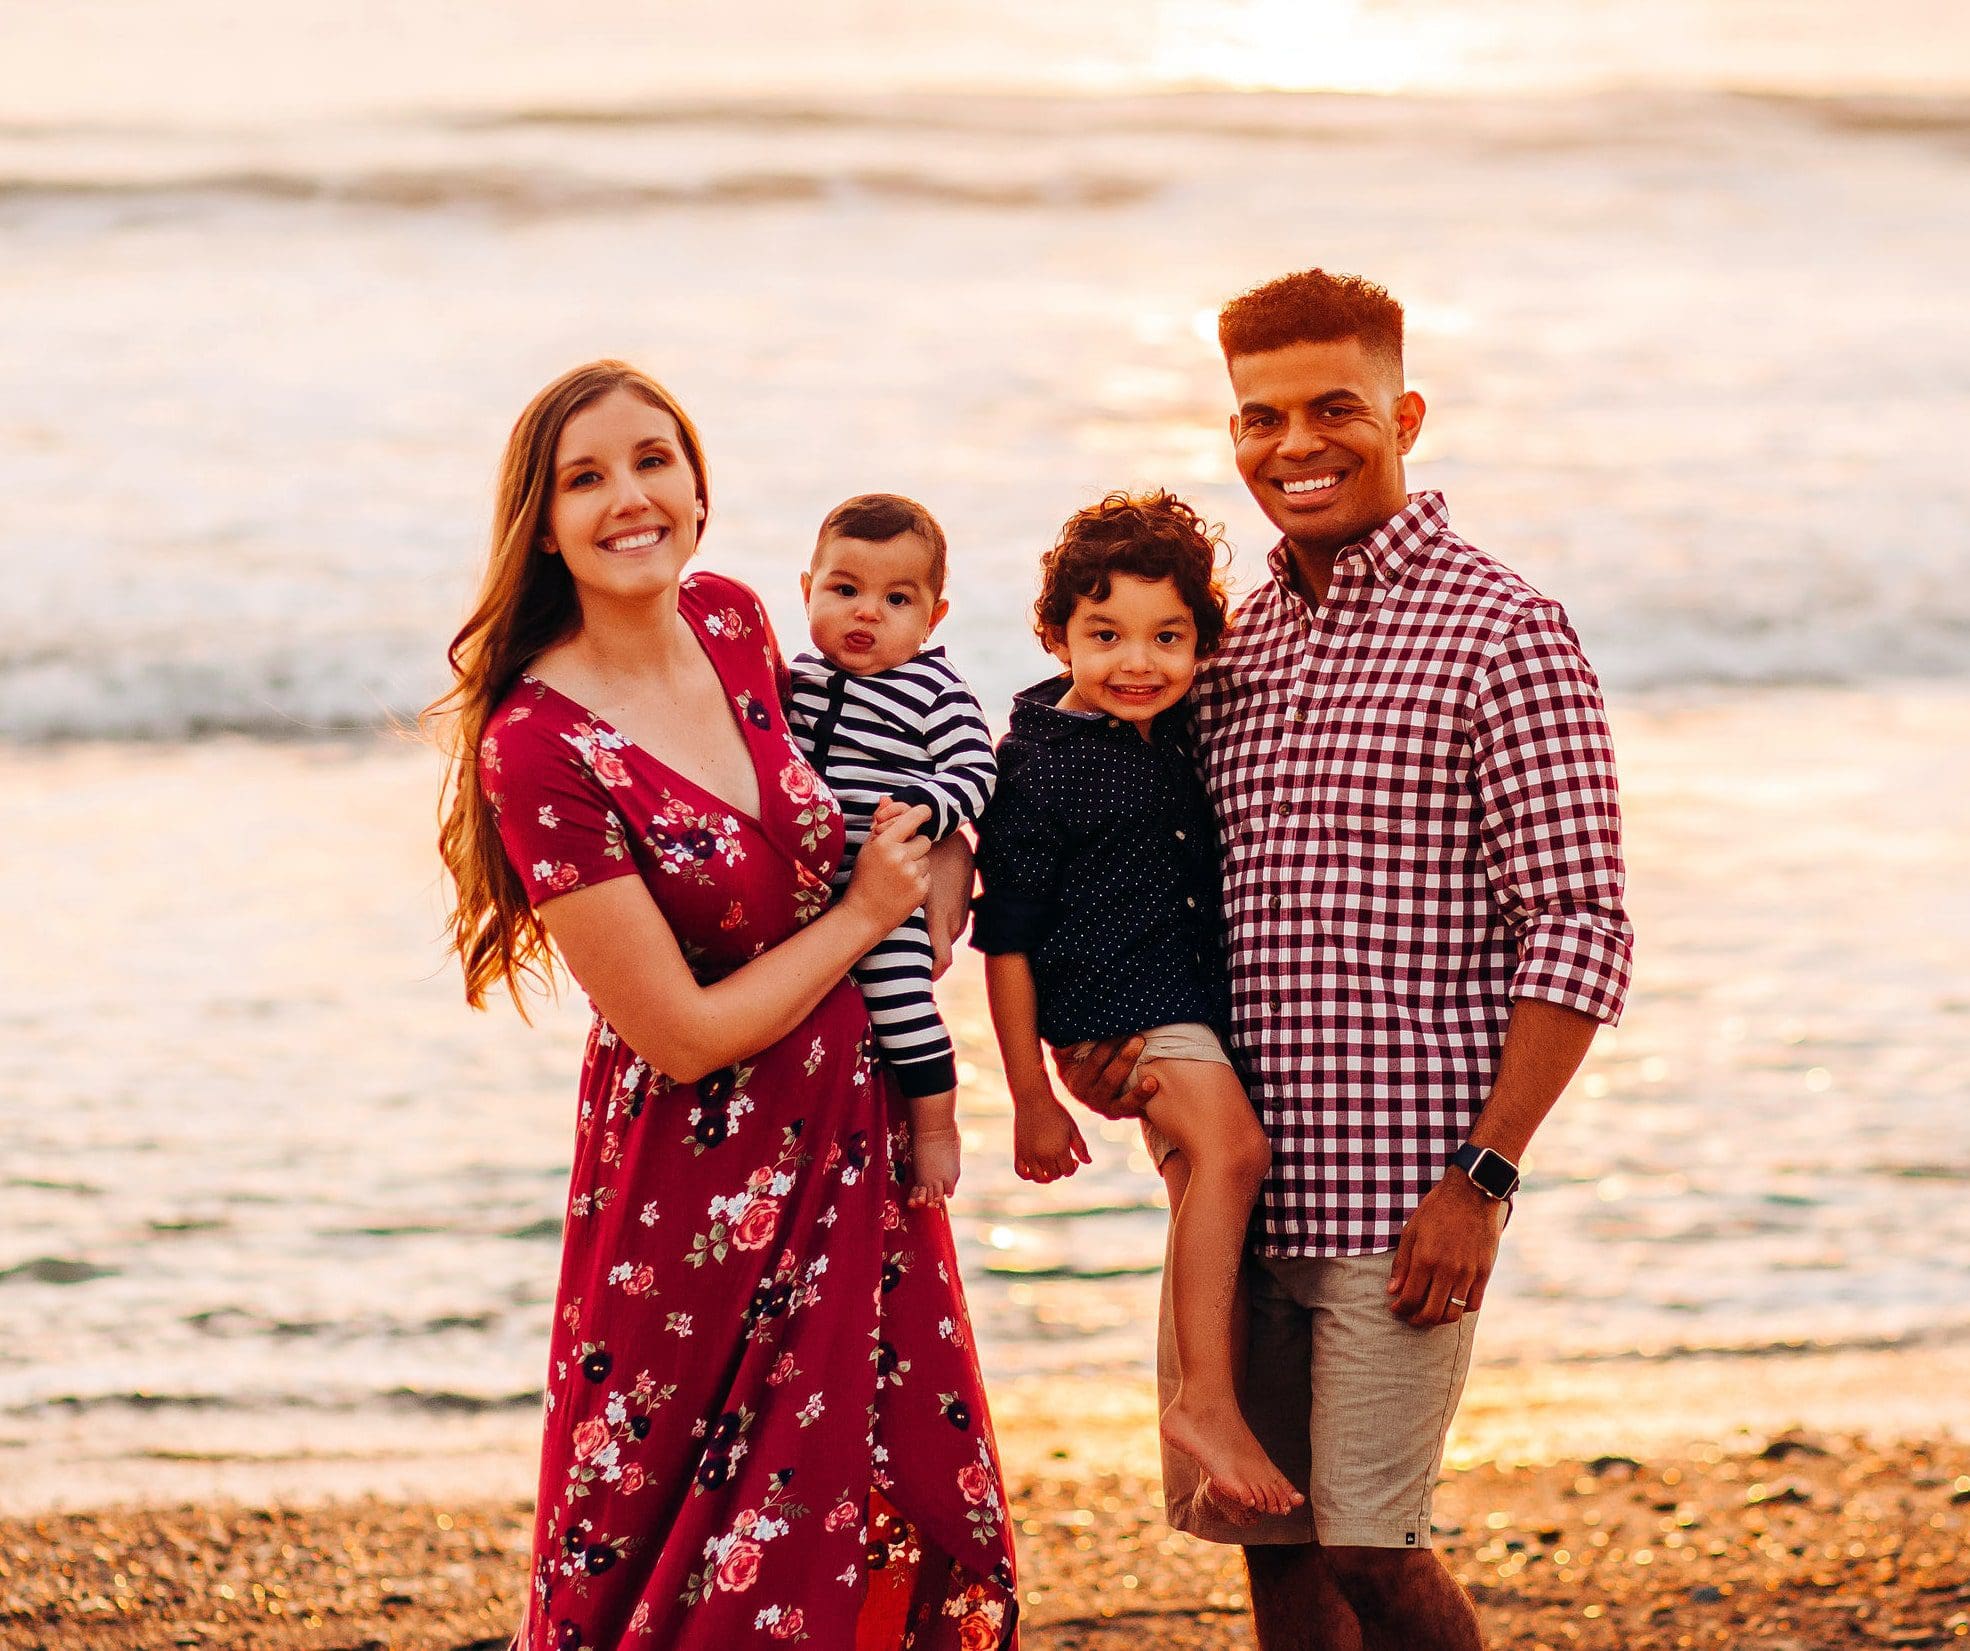 Beautiful family posing for photo in front of the ocean and sunset.